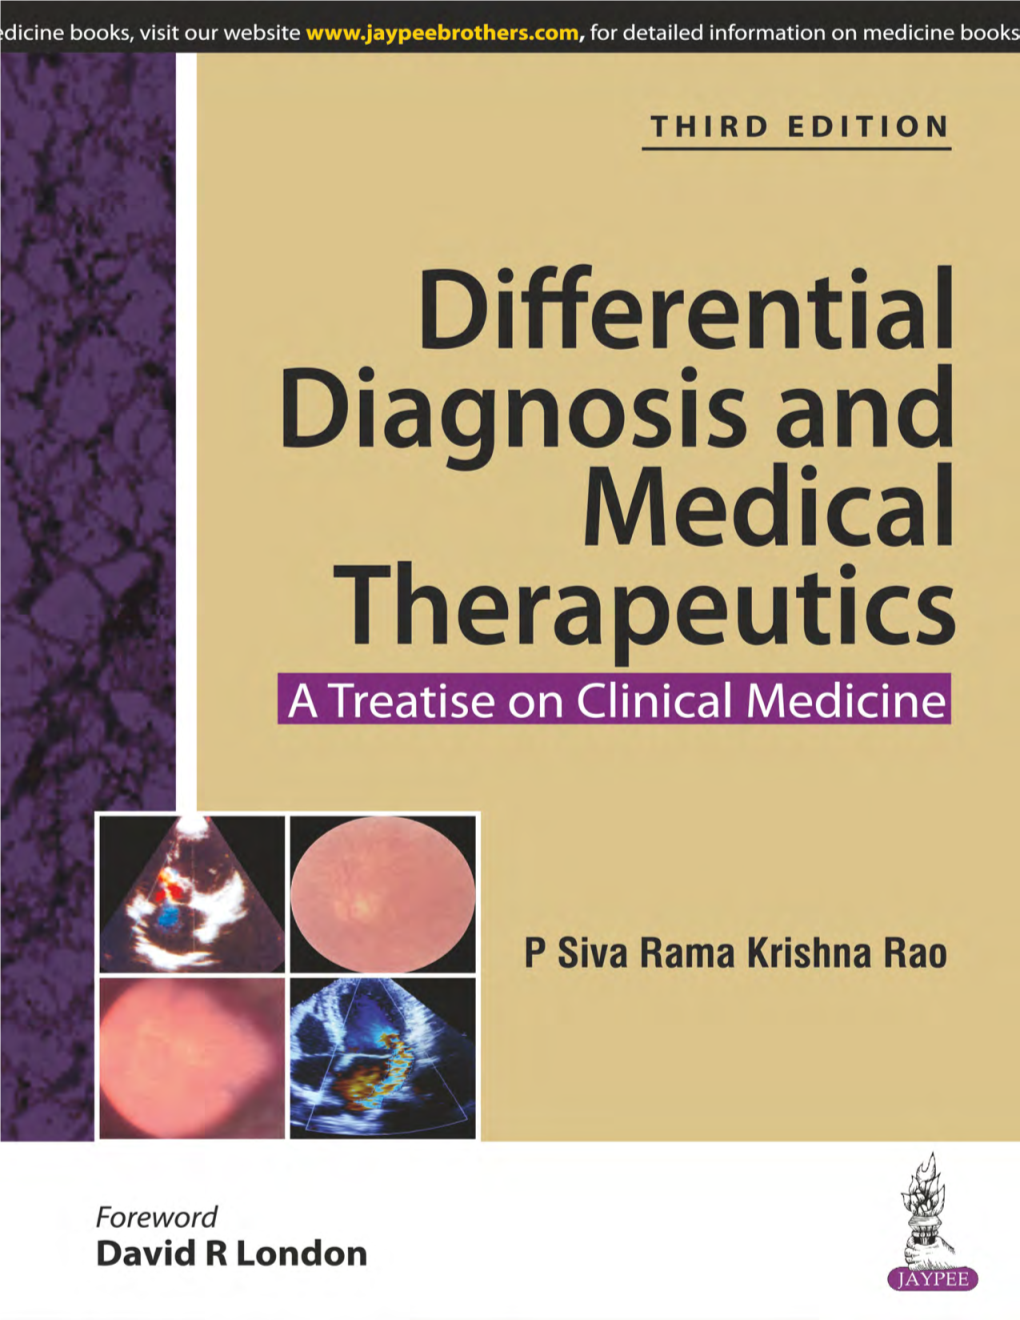 Differential Diagnosis and Medical Therapeutics a Treatise on Clinical Medicine